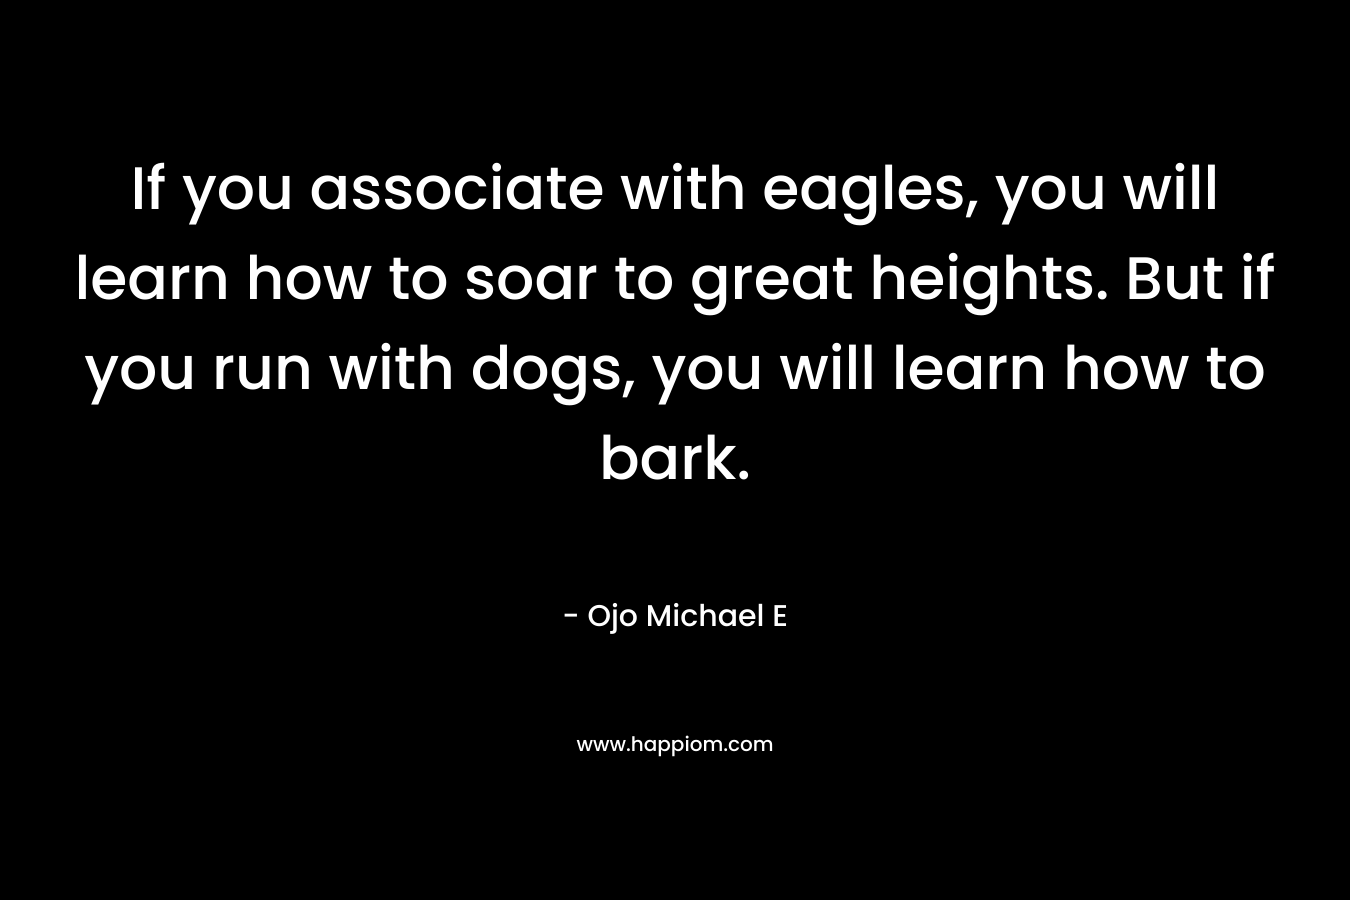 If you associate with eagles, you will learn how to soar to great heights. But if you run with dogs, you will learn how to bark. – Ojo Michael E